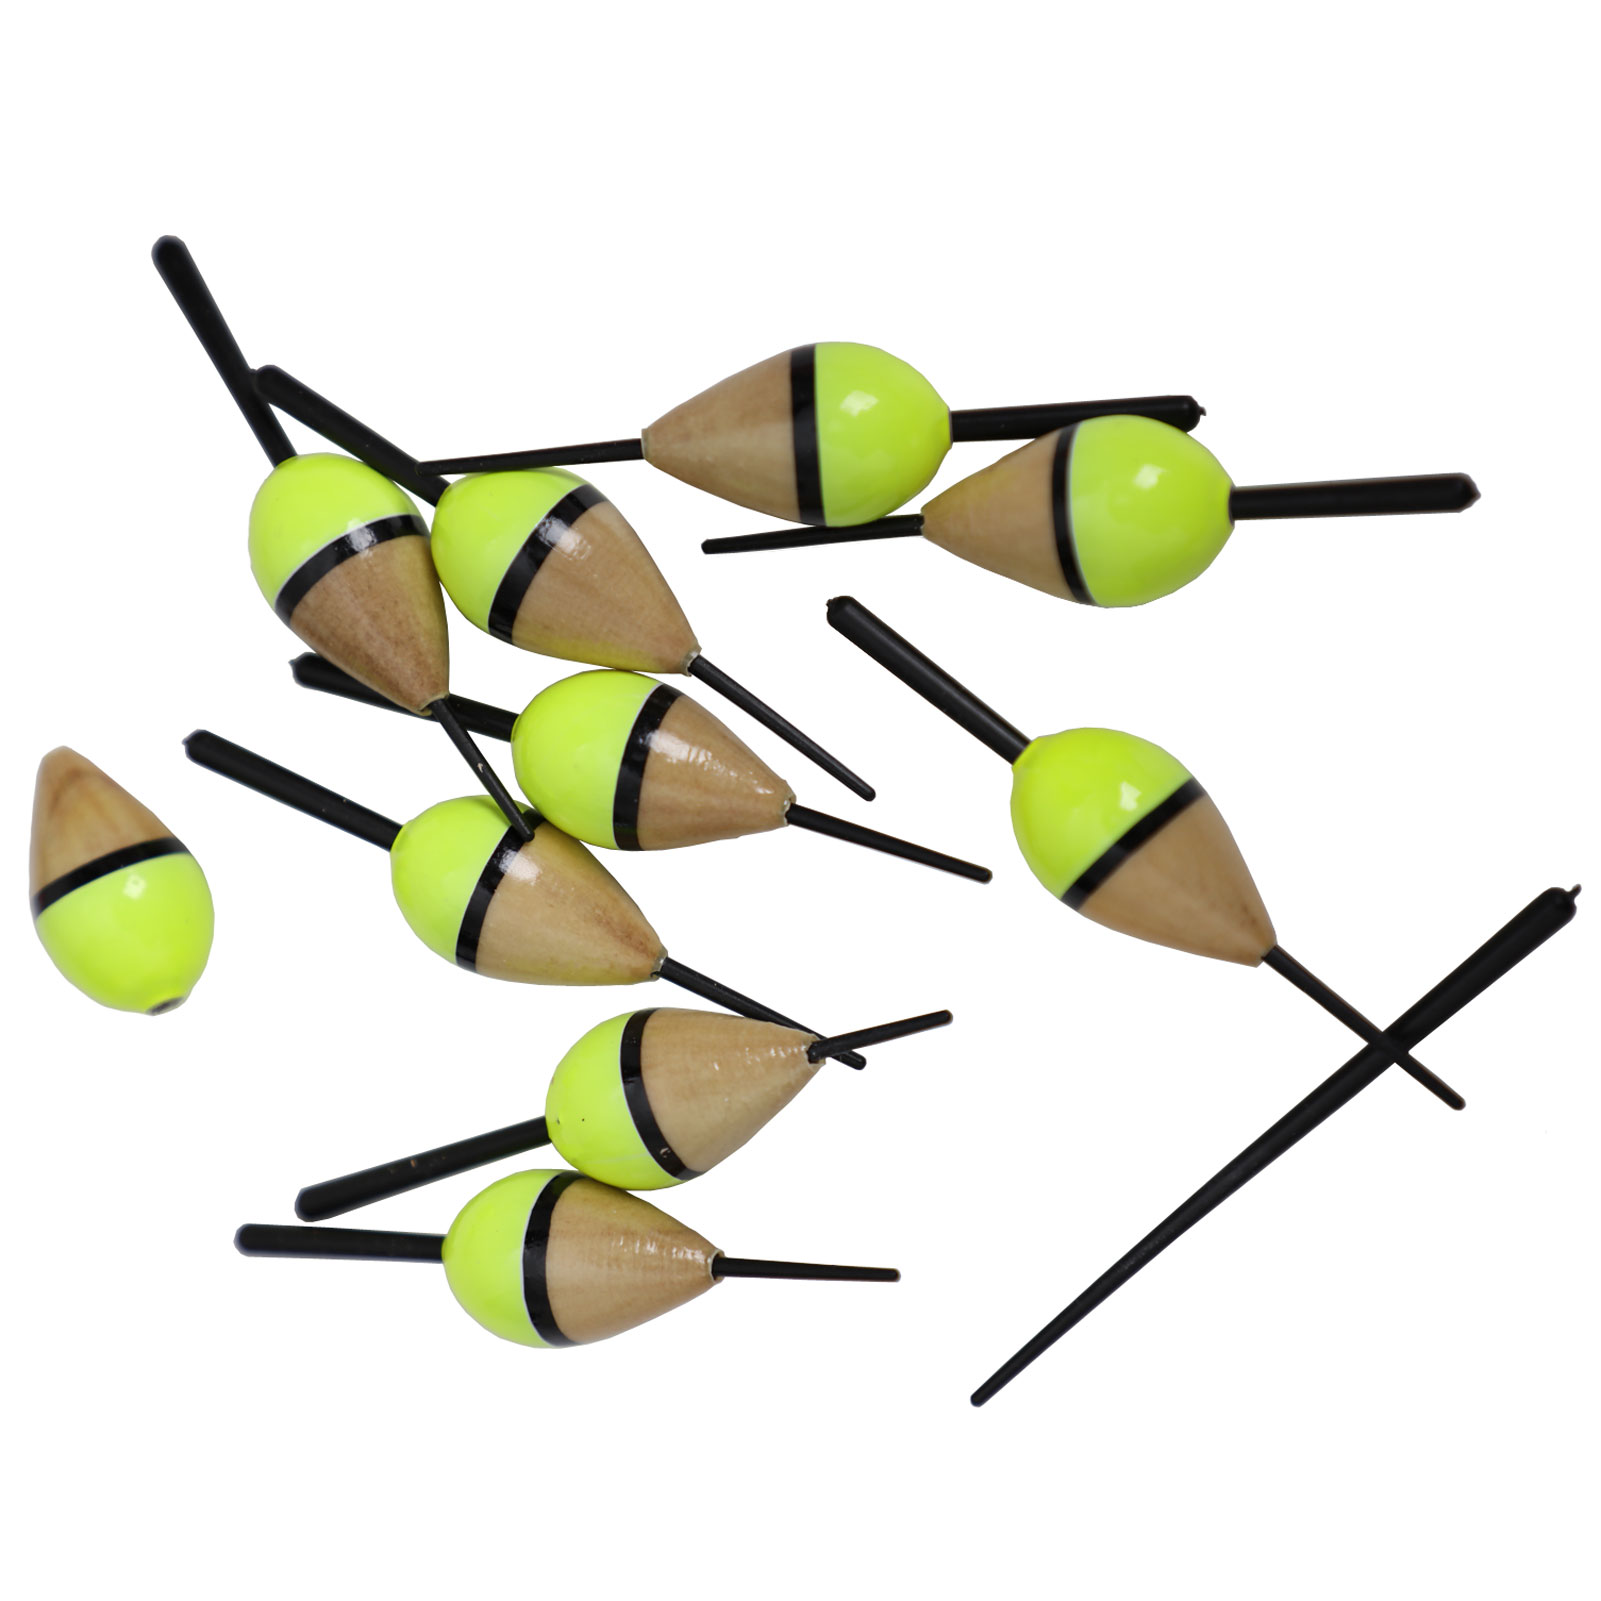 FREE FISHER 10Pcs Fishing Bobber Cork Float Pesca Lighted Double-Color Buoy Wood 1.5g 8.3cm Floats Tackle Accessories